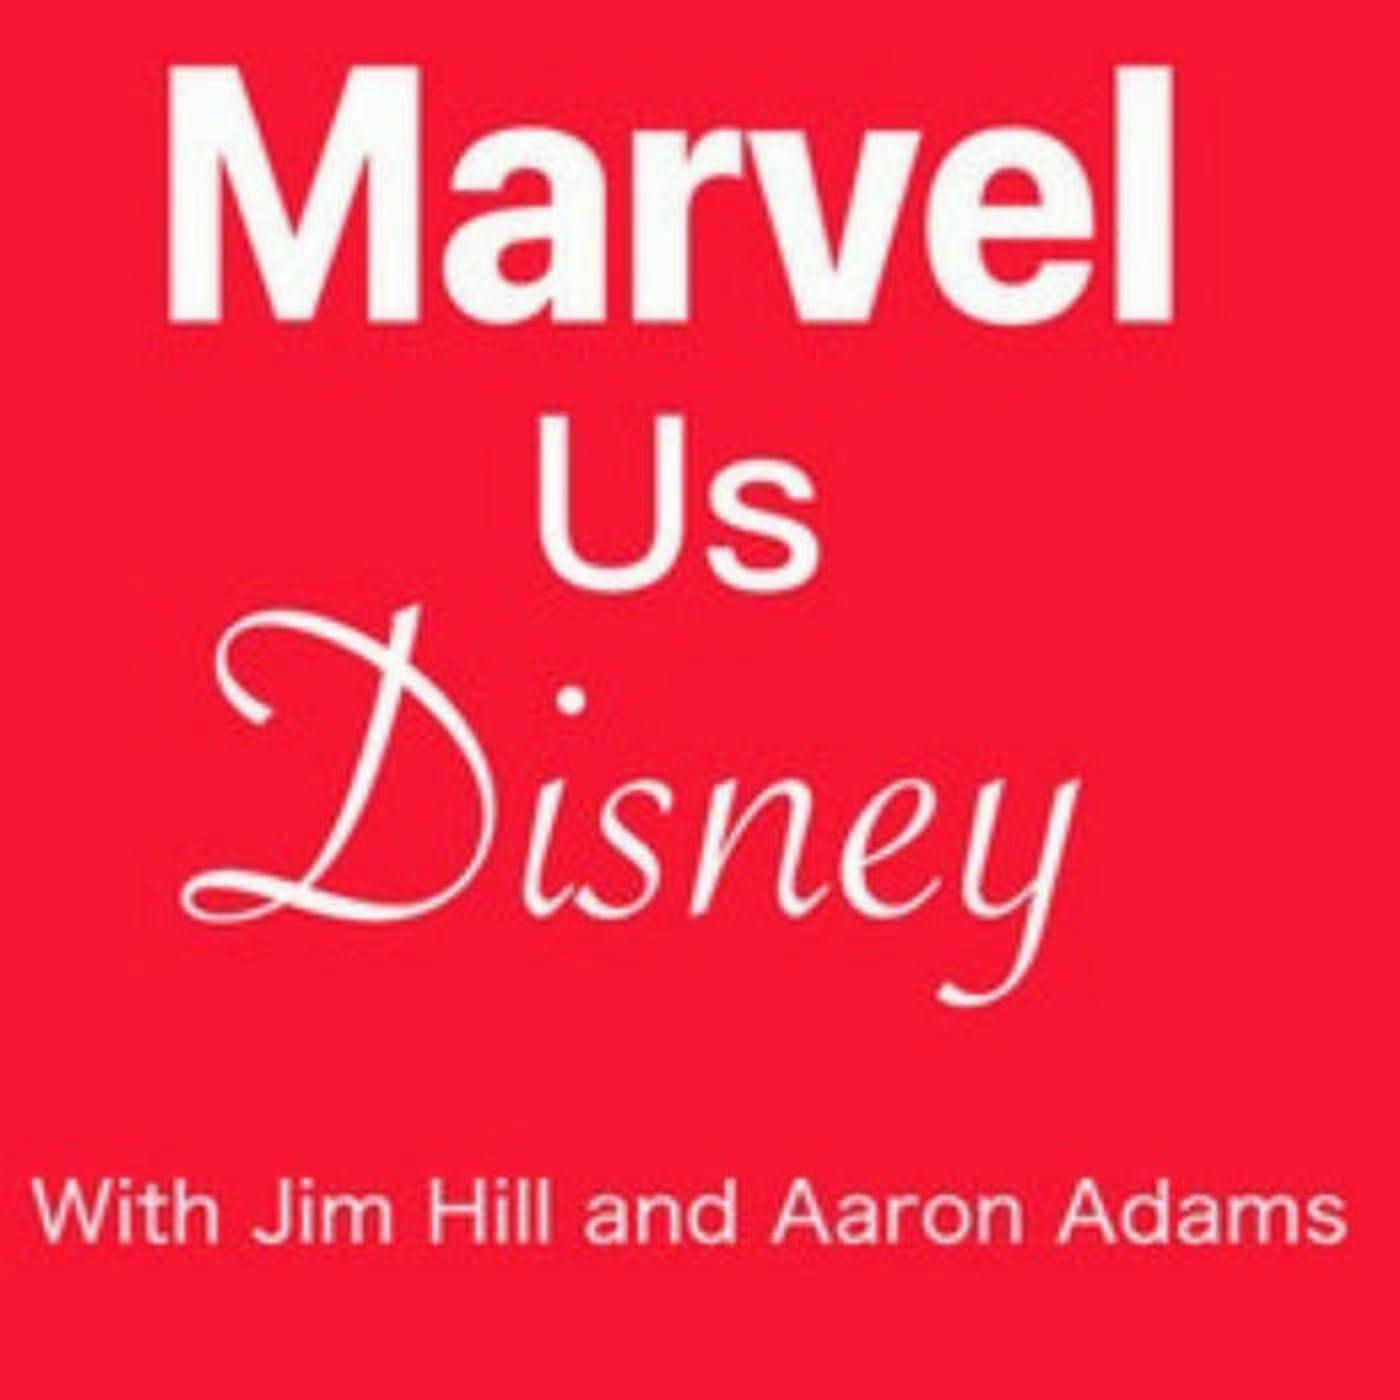 Marvel Us Disney with Aaron Adams Episode 184: Why Owen Wilson is reluctant to talk about Season 2 of “Loki”